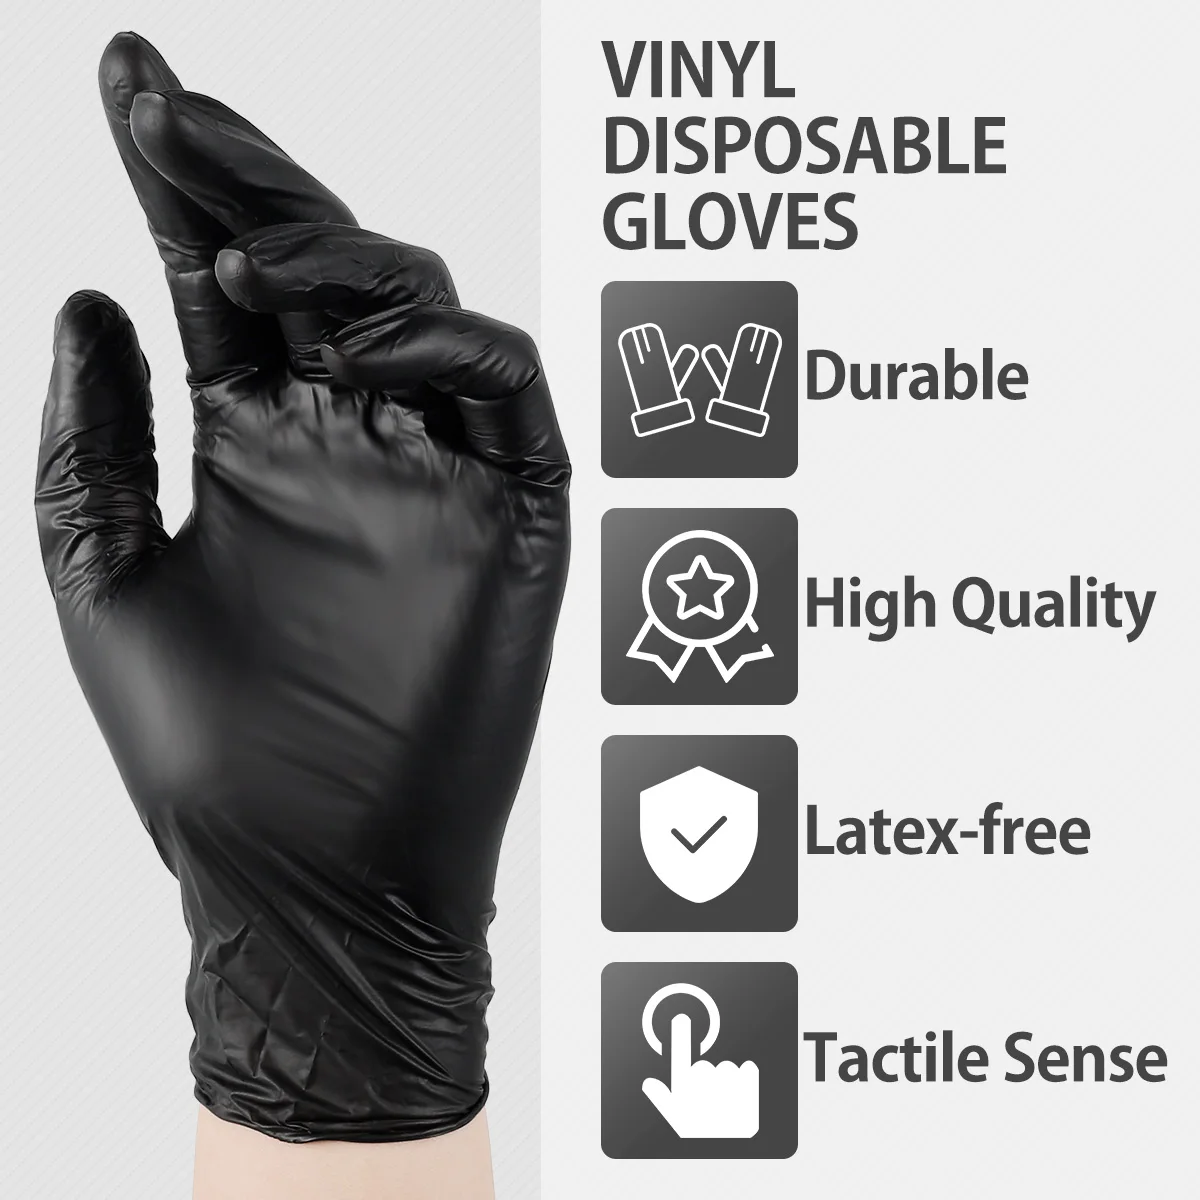 100pcs Black Disposable Rubber Nitrile Gloves for Cooking Work Housework Kitchen Home Cleaning Car Repair Waterproof Gloves